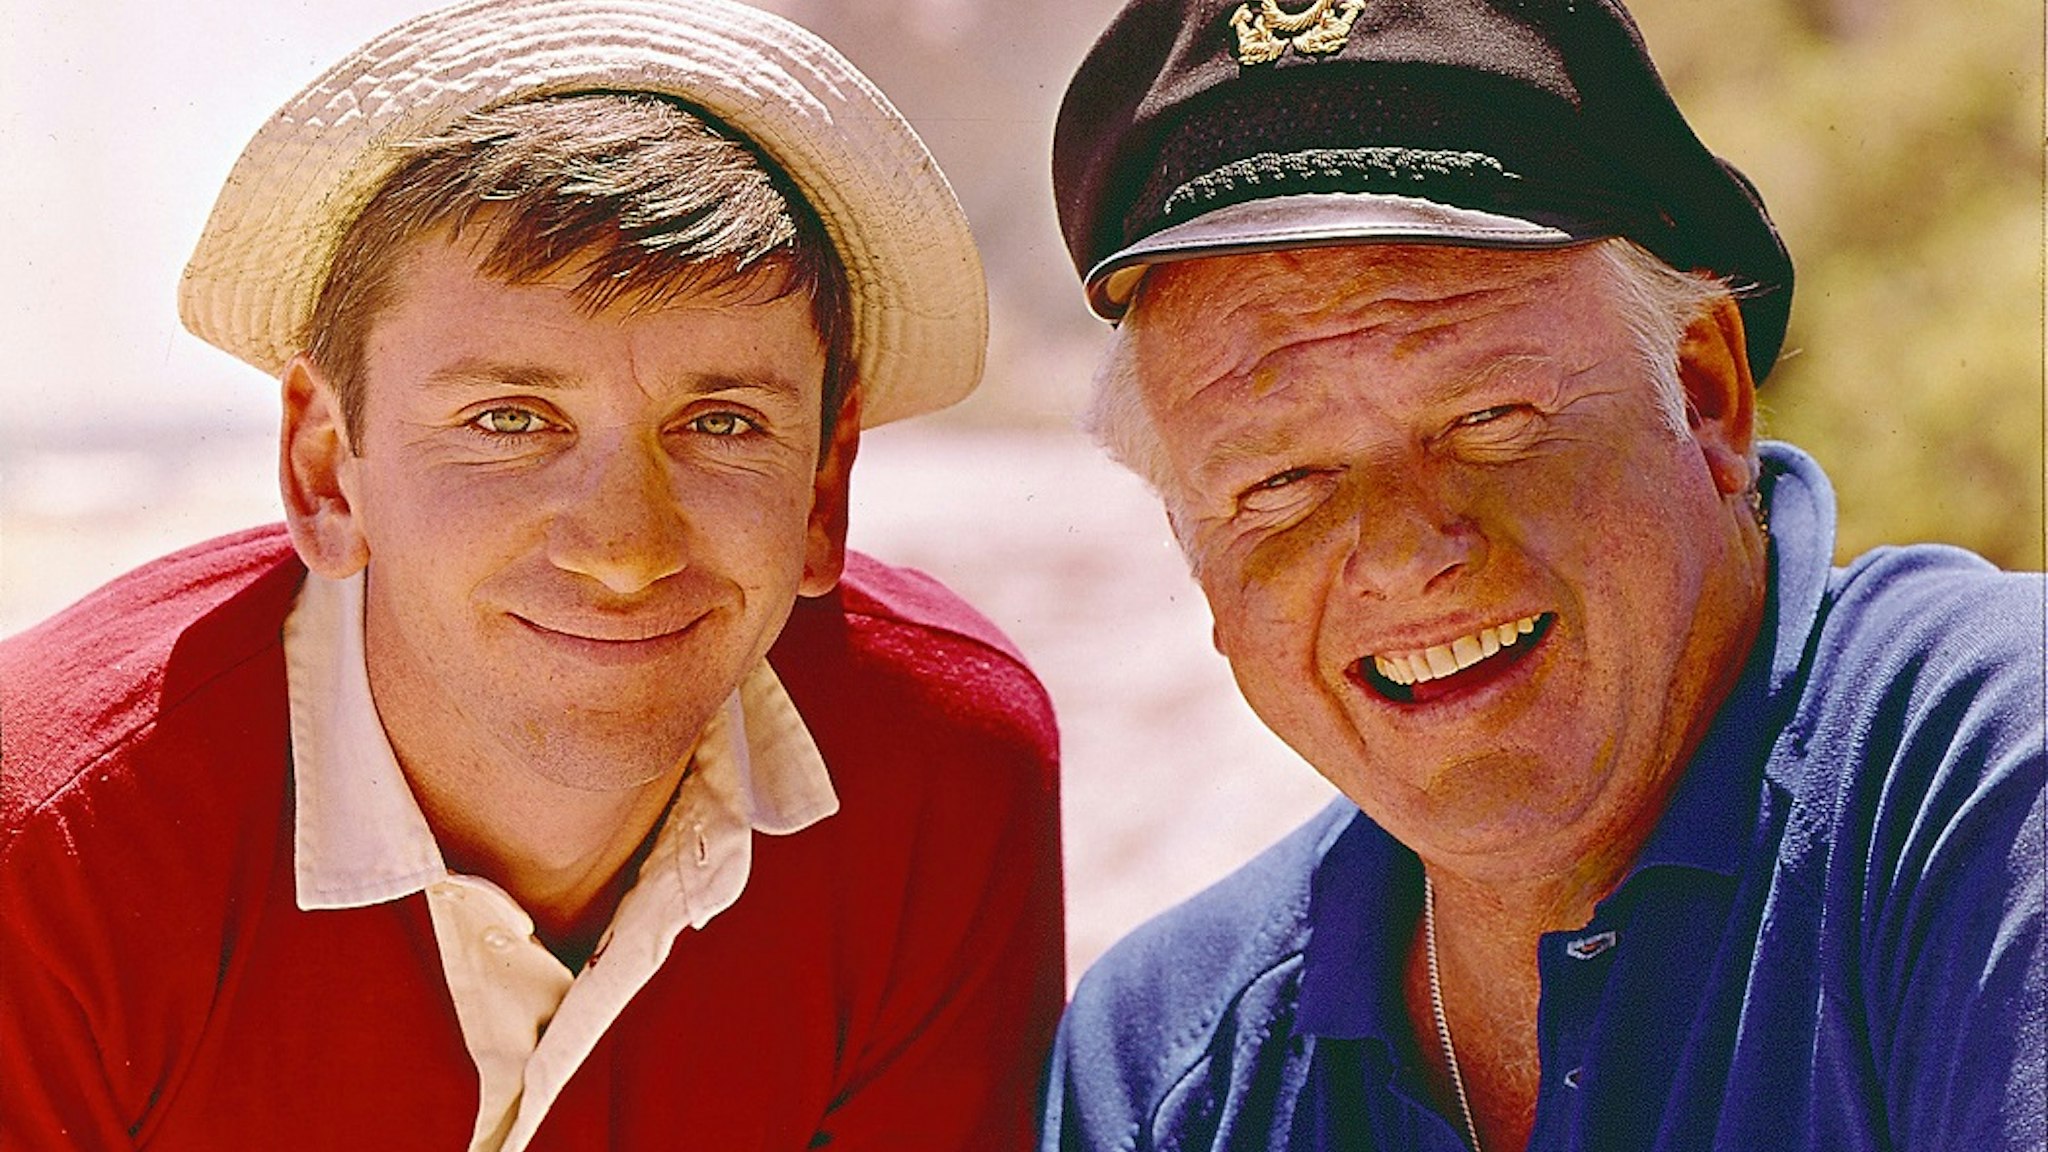 LOS ANGELES - JANUARY 1: GILLIGAN'S ISLAND cast members (from left) Bob Denver (as Gilligan) and Alan Hale Jr. (as Jonas Grumby, The Skipper), 1965.